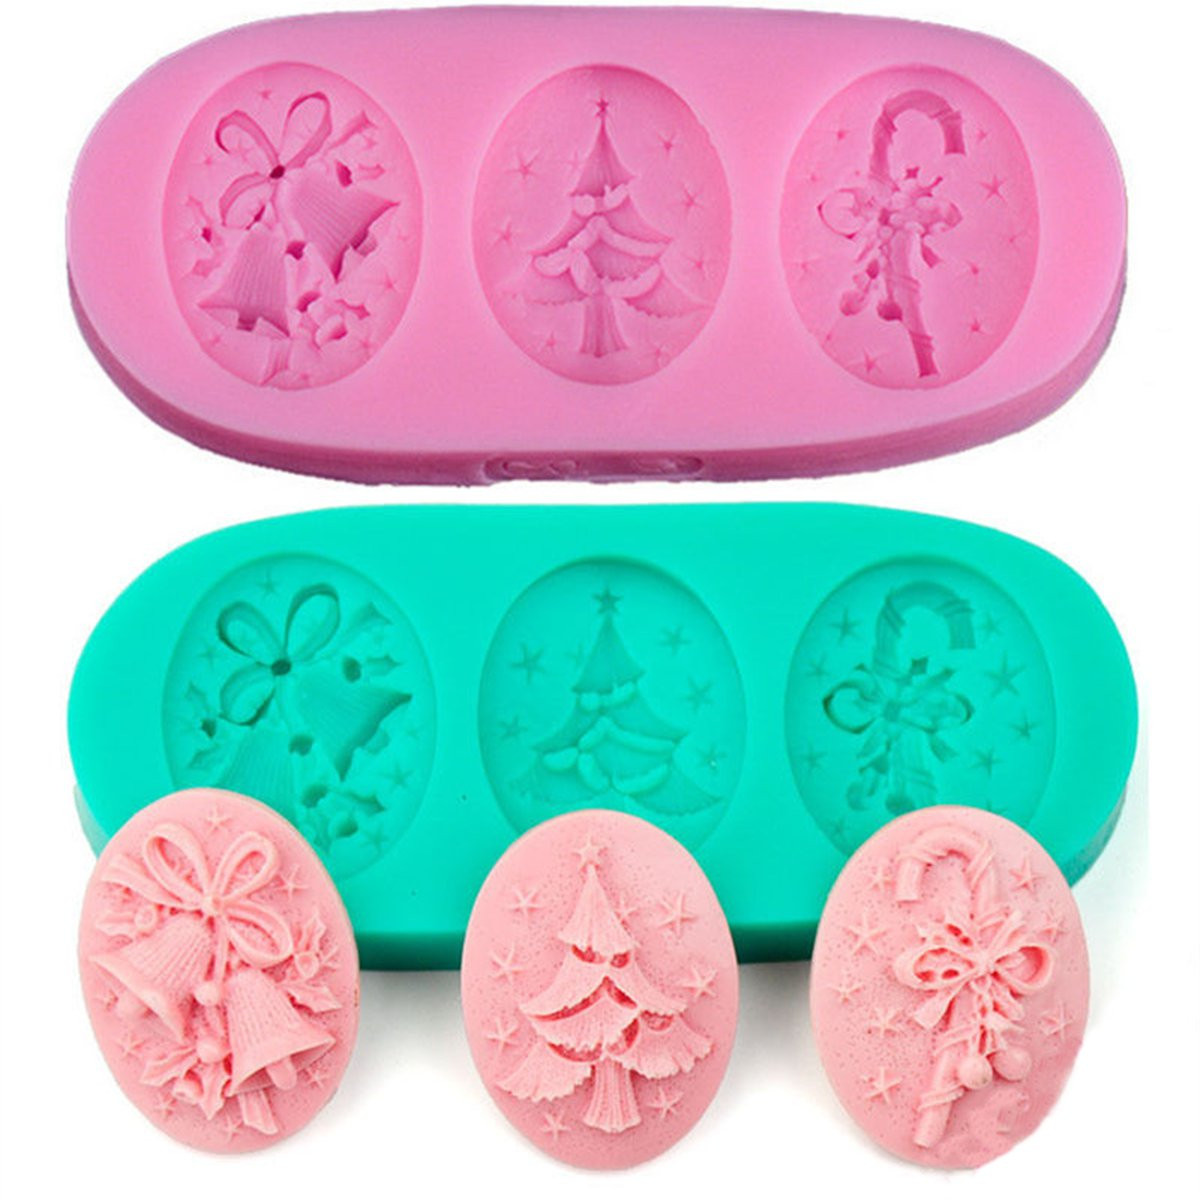 Christmas-Tree-Silicone-Fondant-Cake-Mold-Soap-Chocolate-Candy-Decorating-Mould-1589459-6